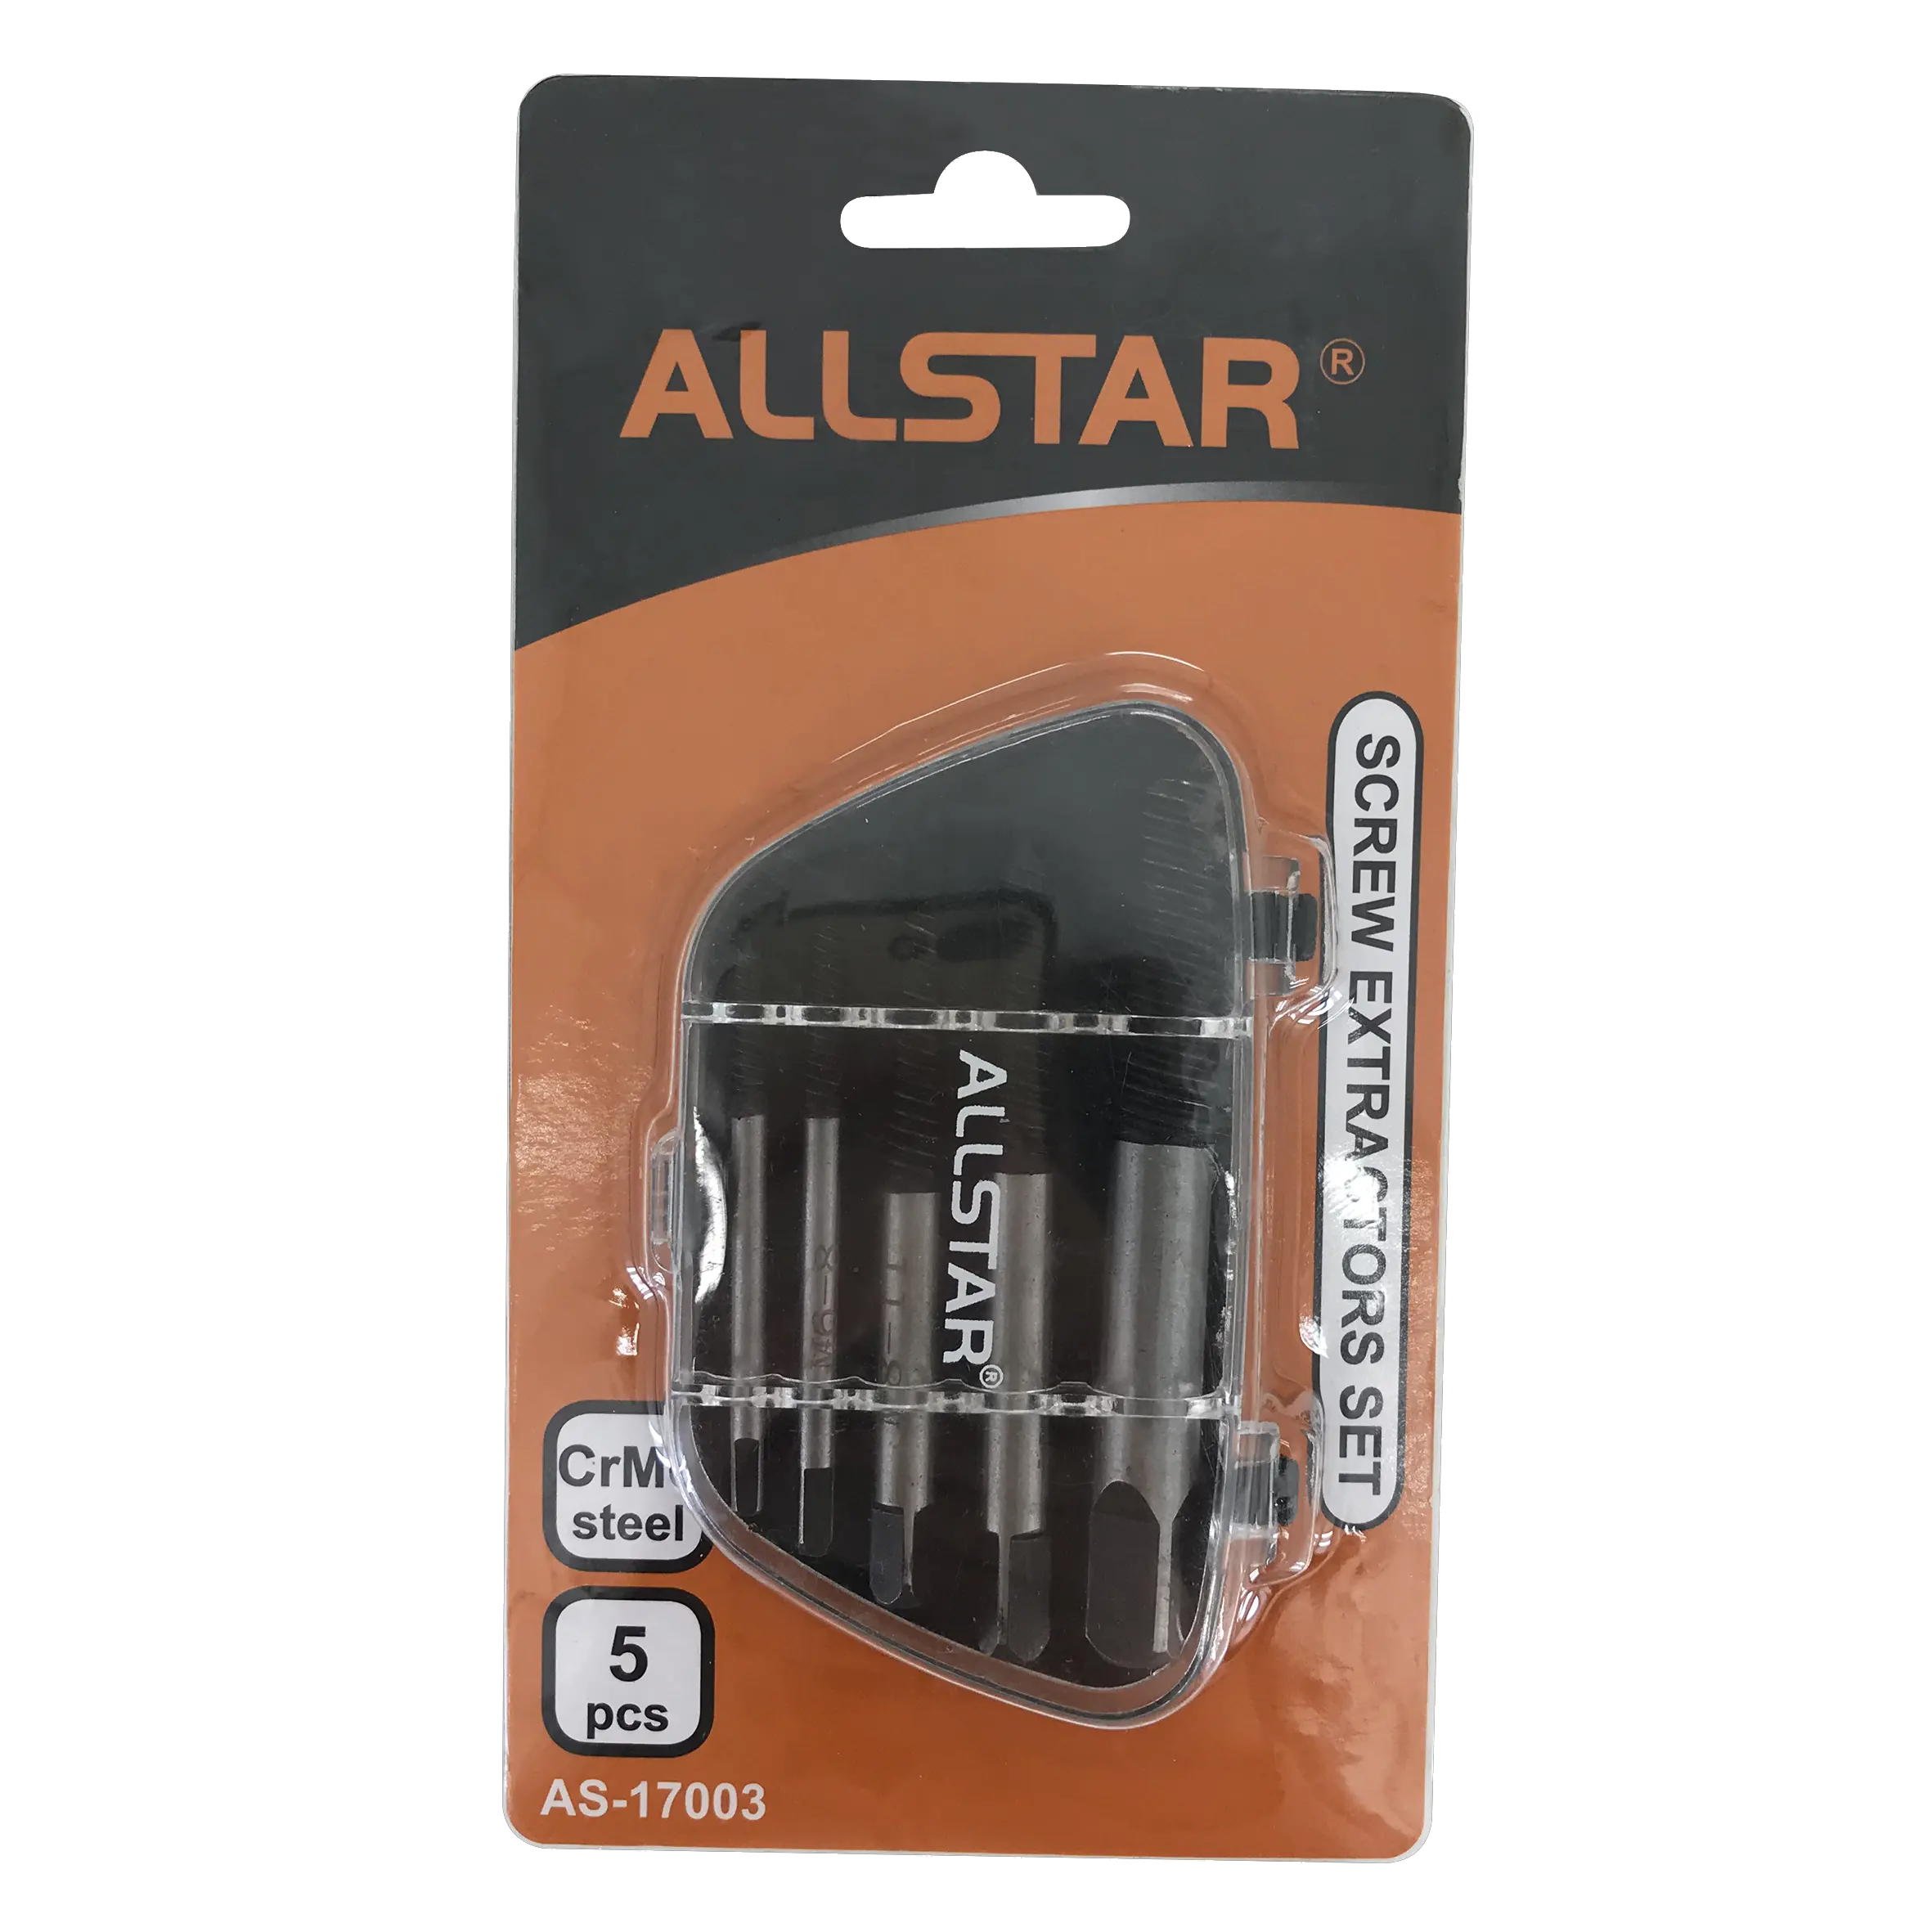 All Star Factory Direct Sale Professional hand tools screw extractors set